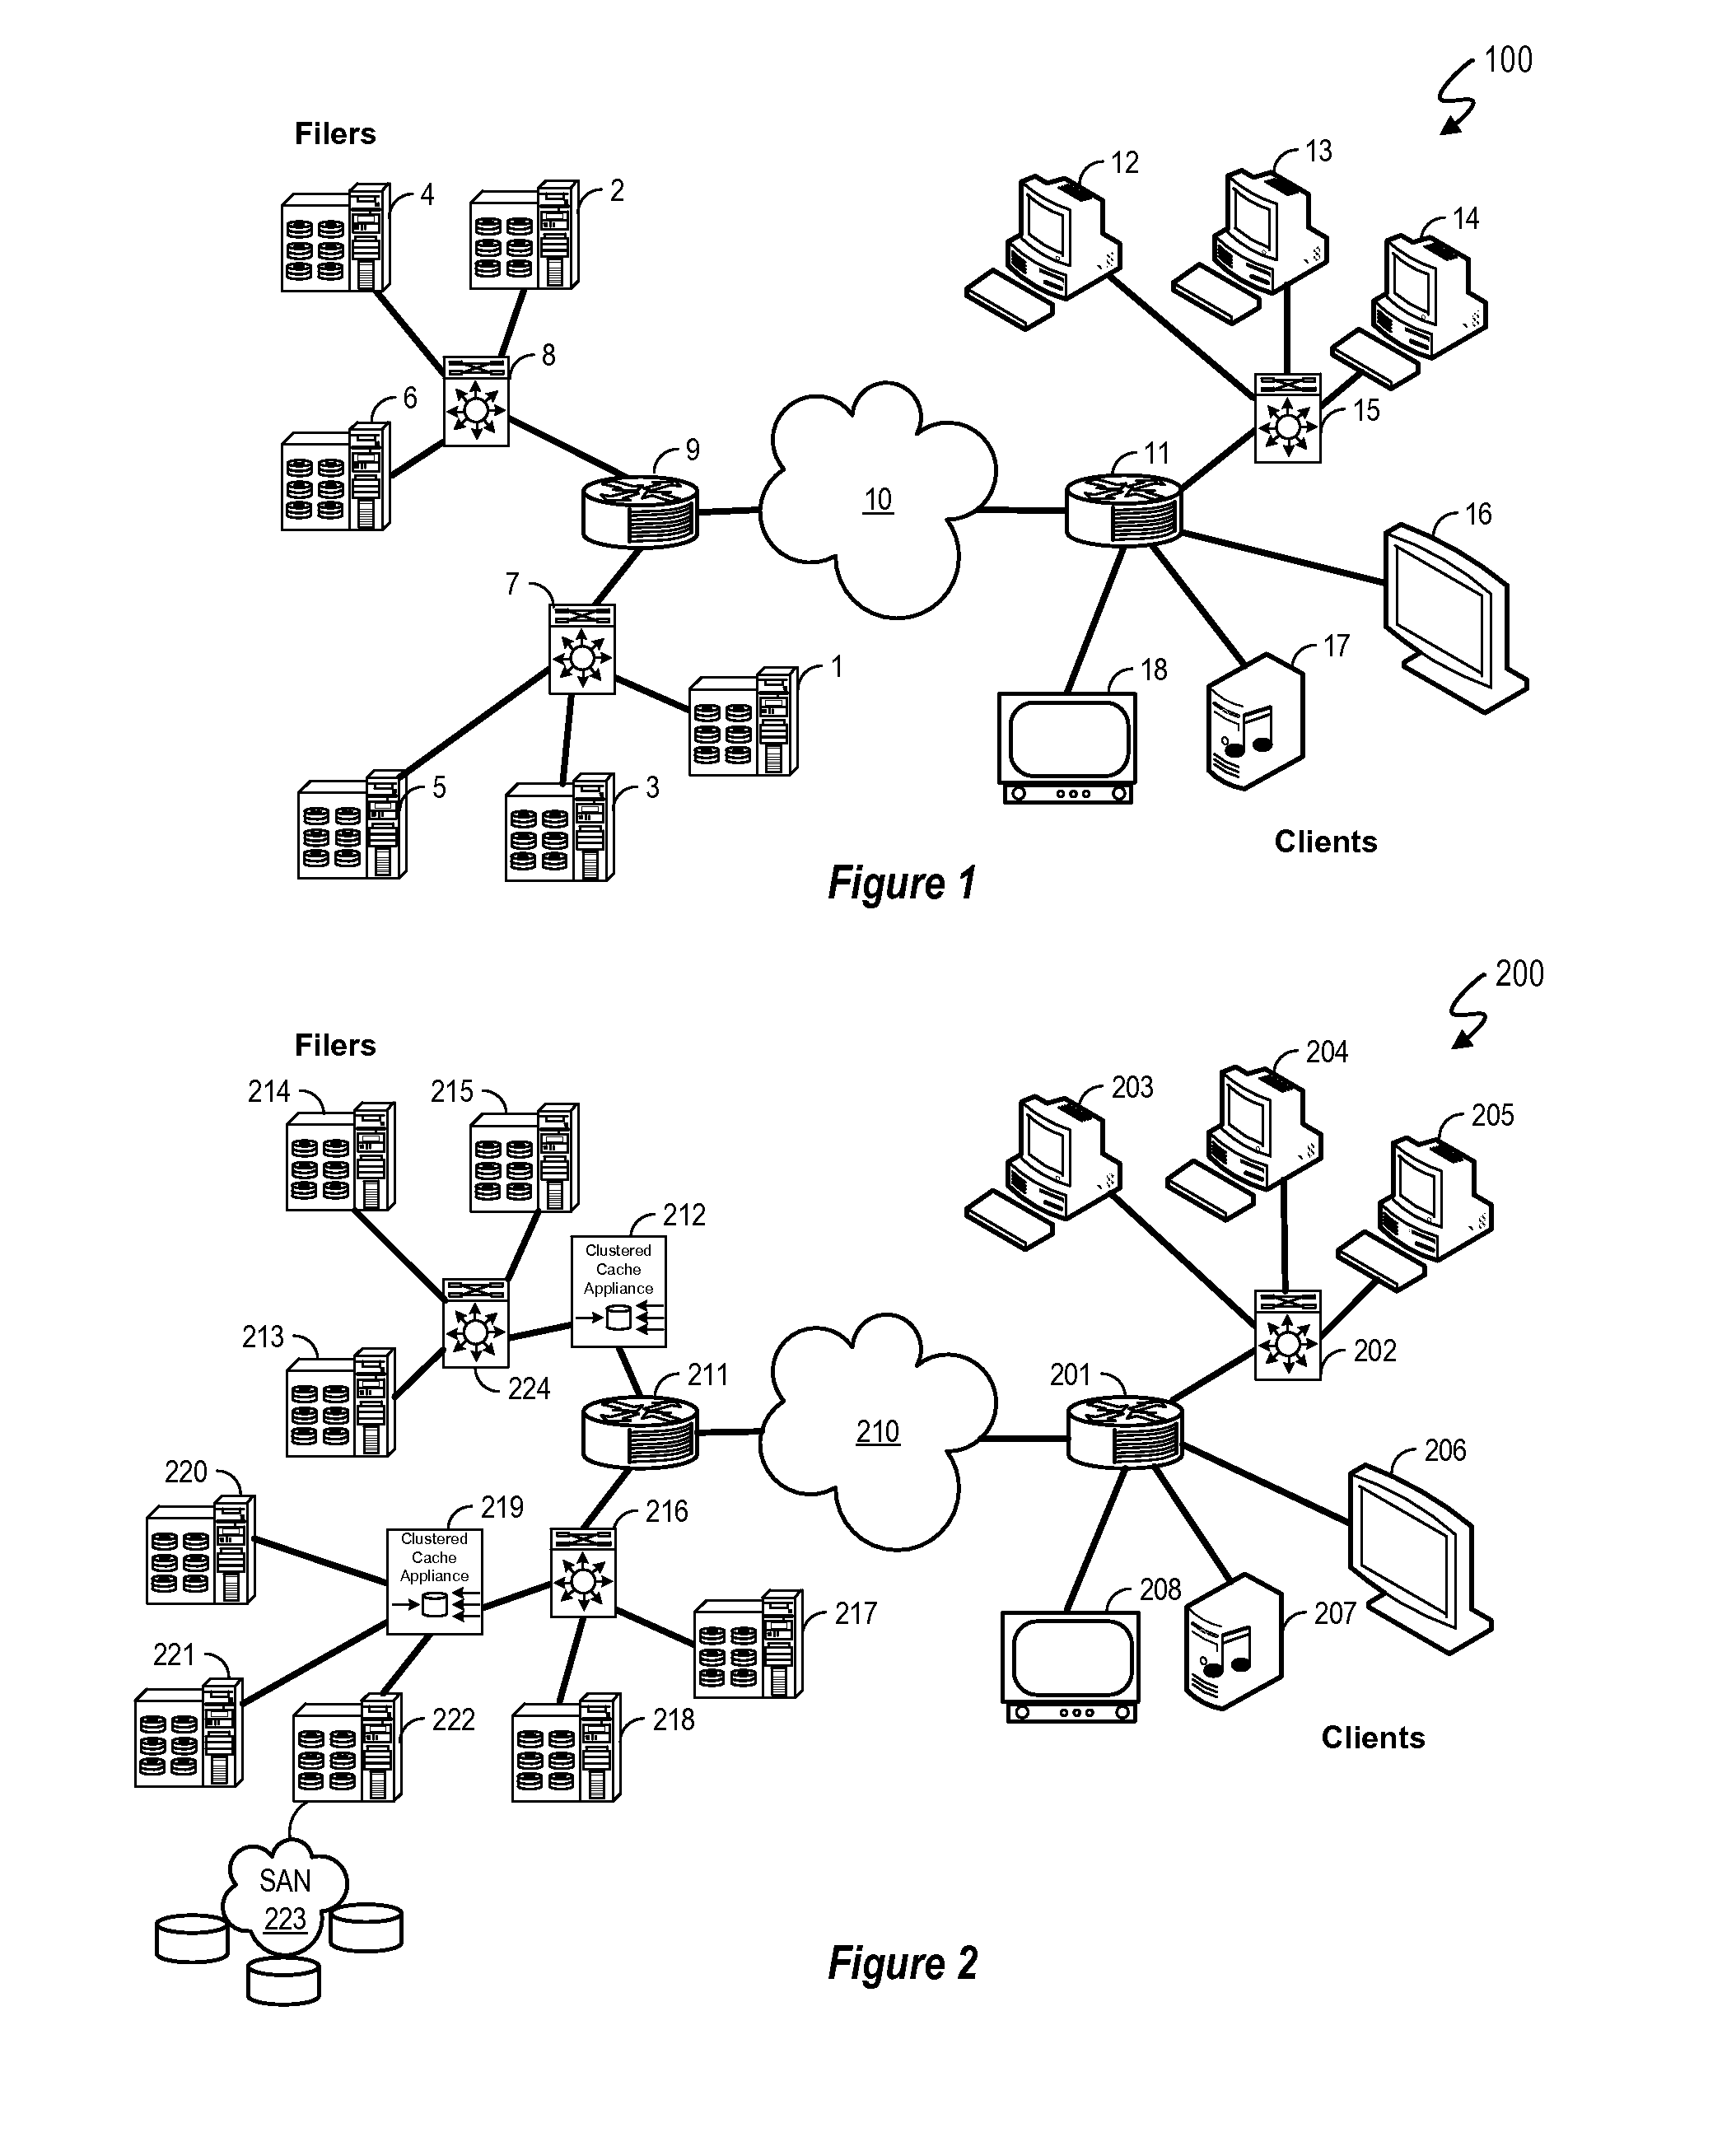 Clustered cache appliance system and methodology